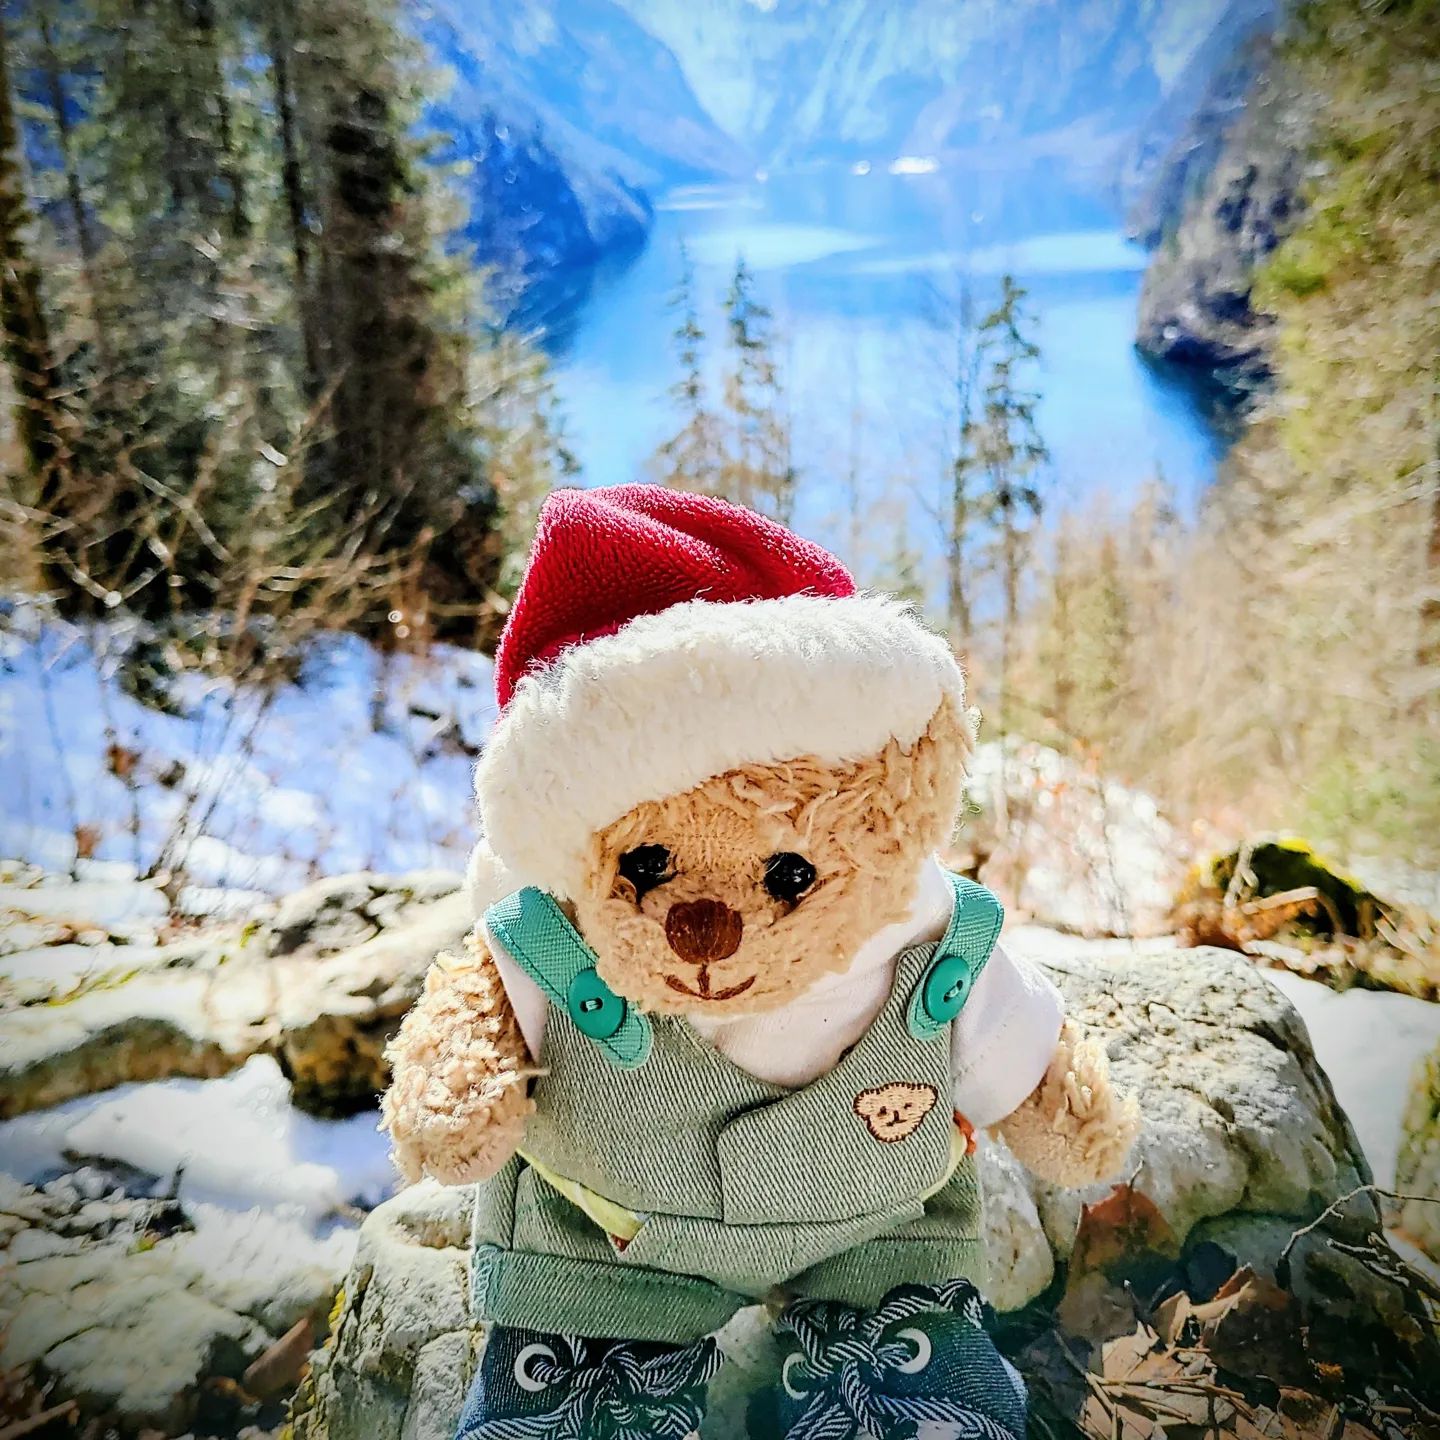 "We think too much and feel too little. More than machinery, we need humanity; more than cleverness, we need kindness and gentleness. Without these qualities, life will be violent and all will be lost." Charlie Chaplin
#berchtesgadenerland  #königssee #konigseelake #naturliebe #animalsarefriendsnotfood #bekindtoeverykind #peaceforanimals #peaceforpeople